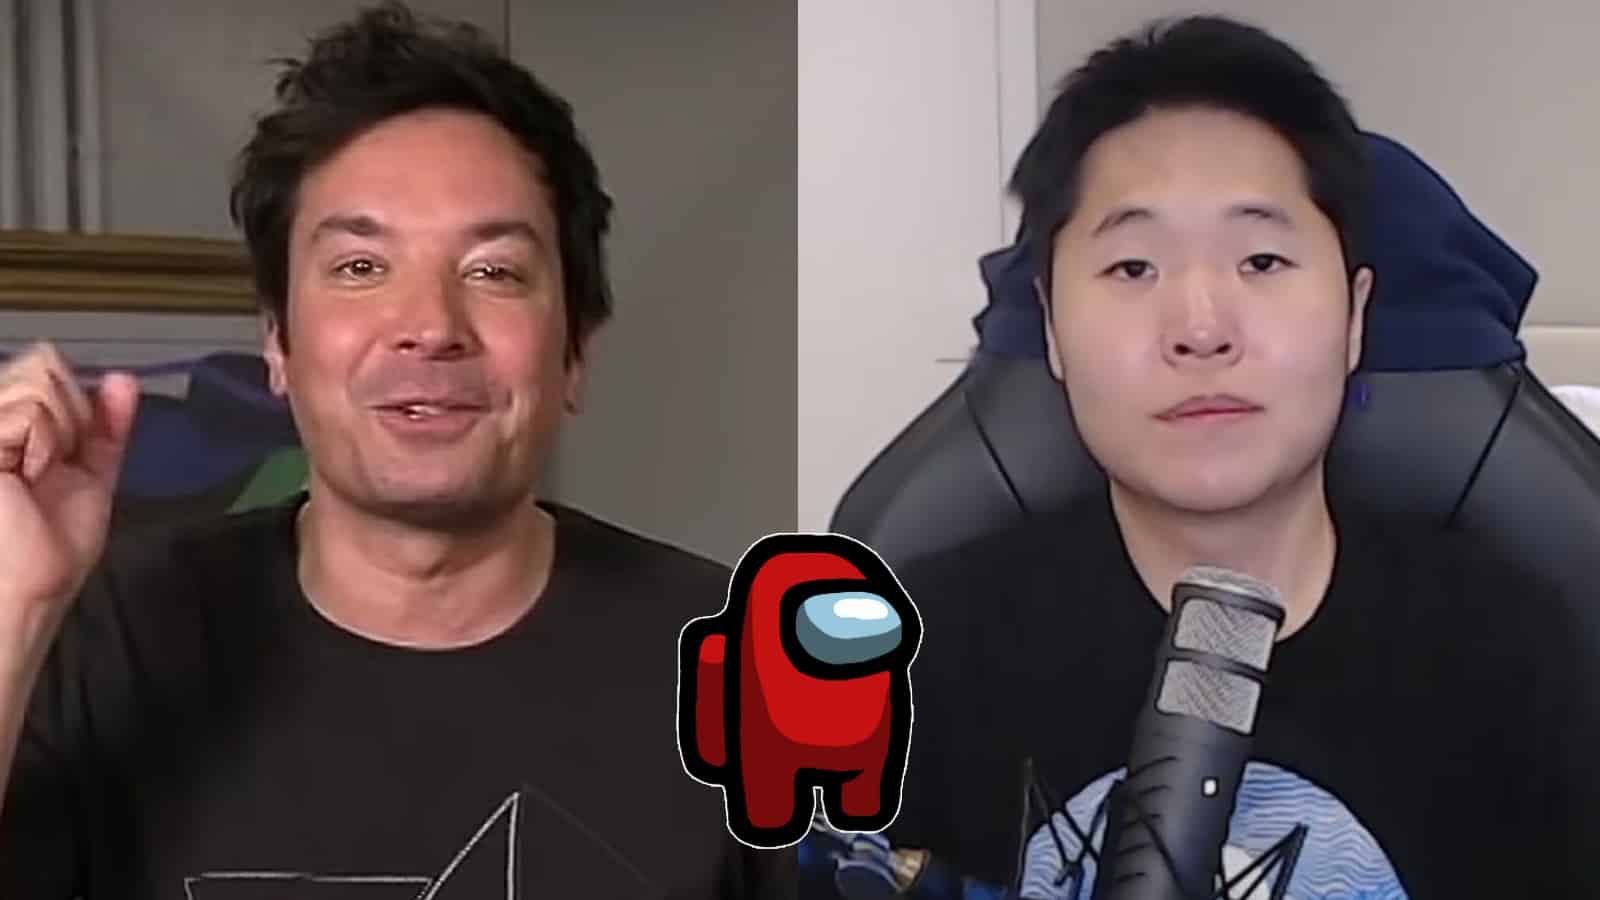 Jimmy Fallon and Disguised Toast with Among Us character